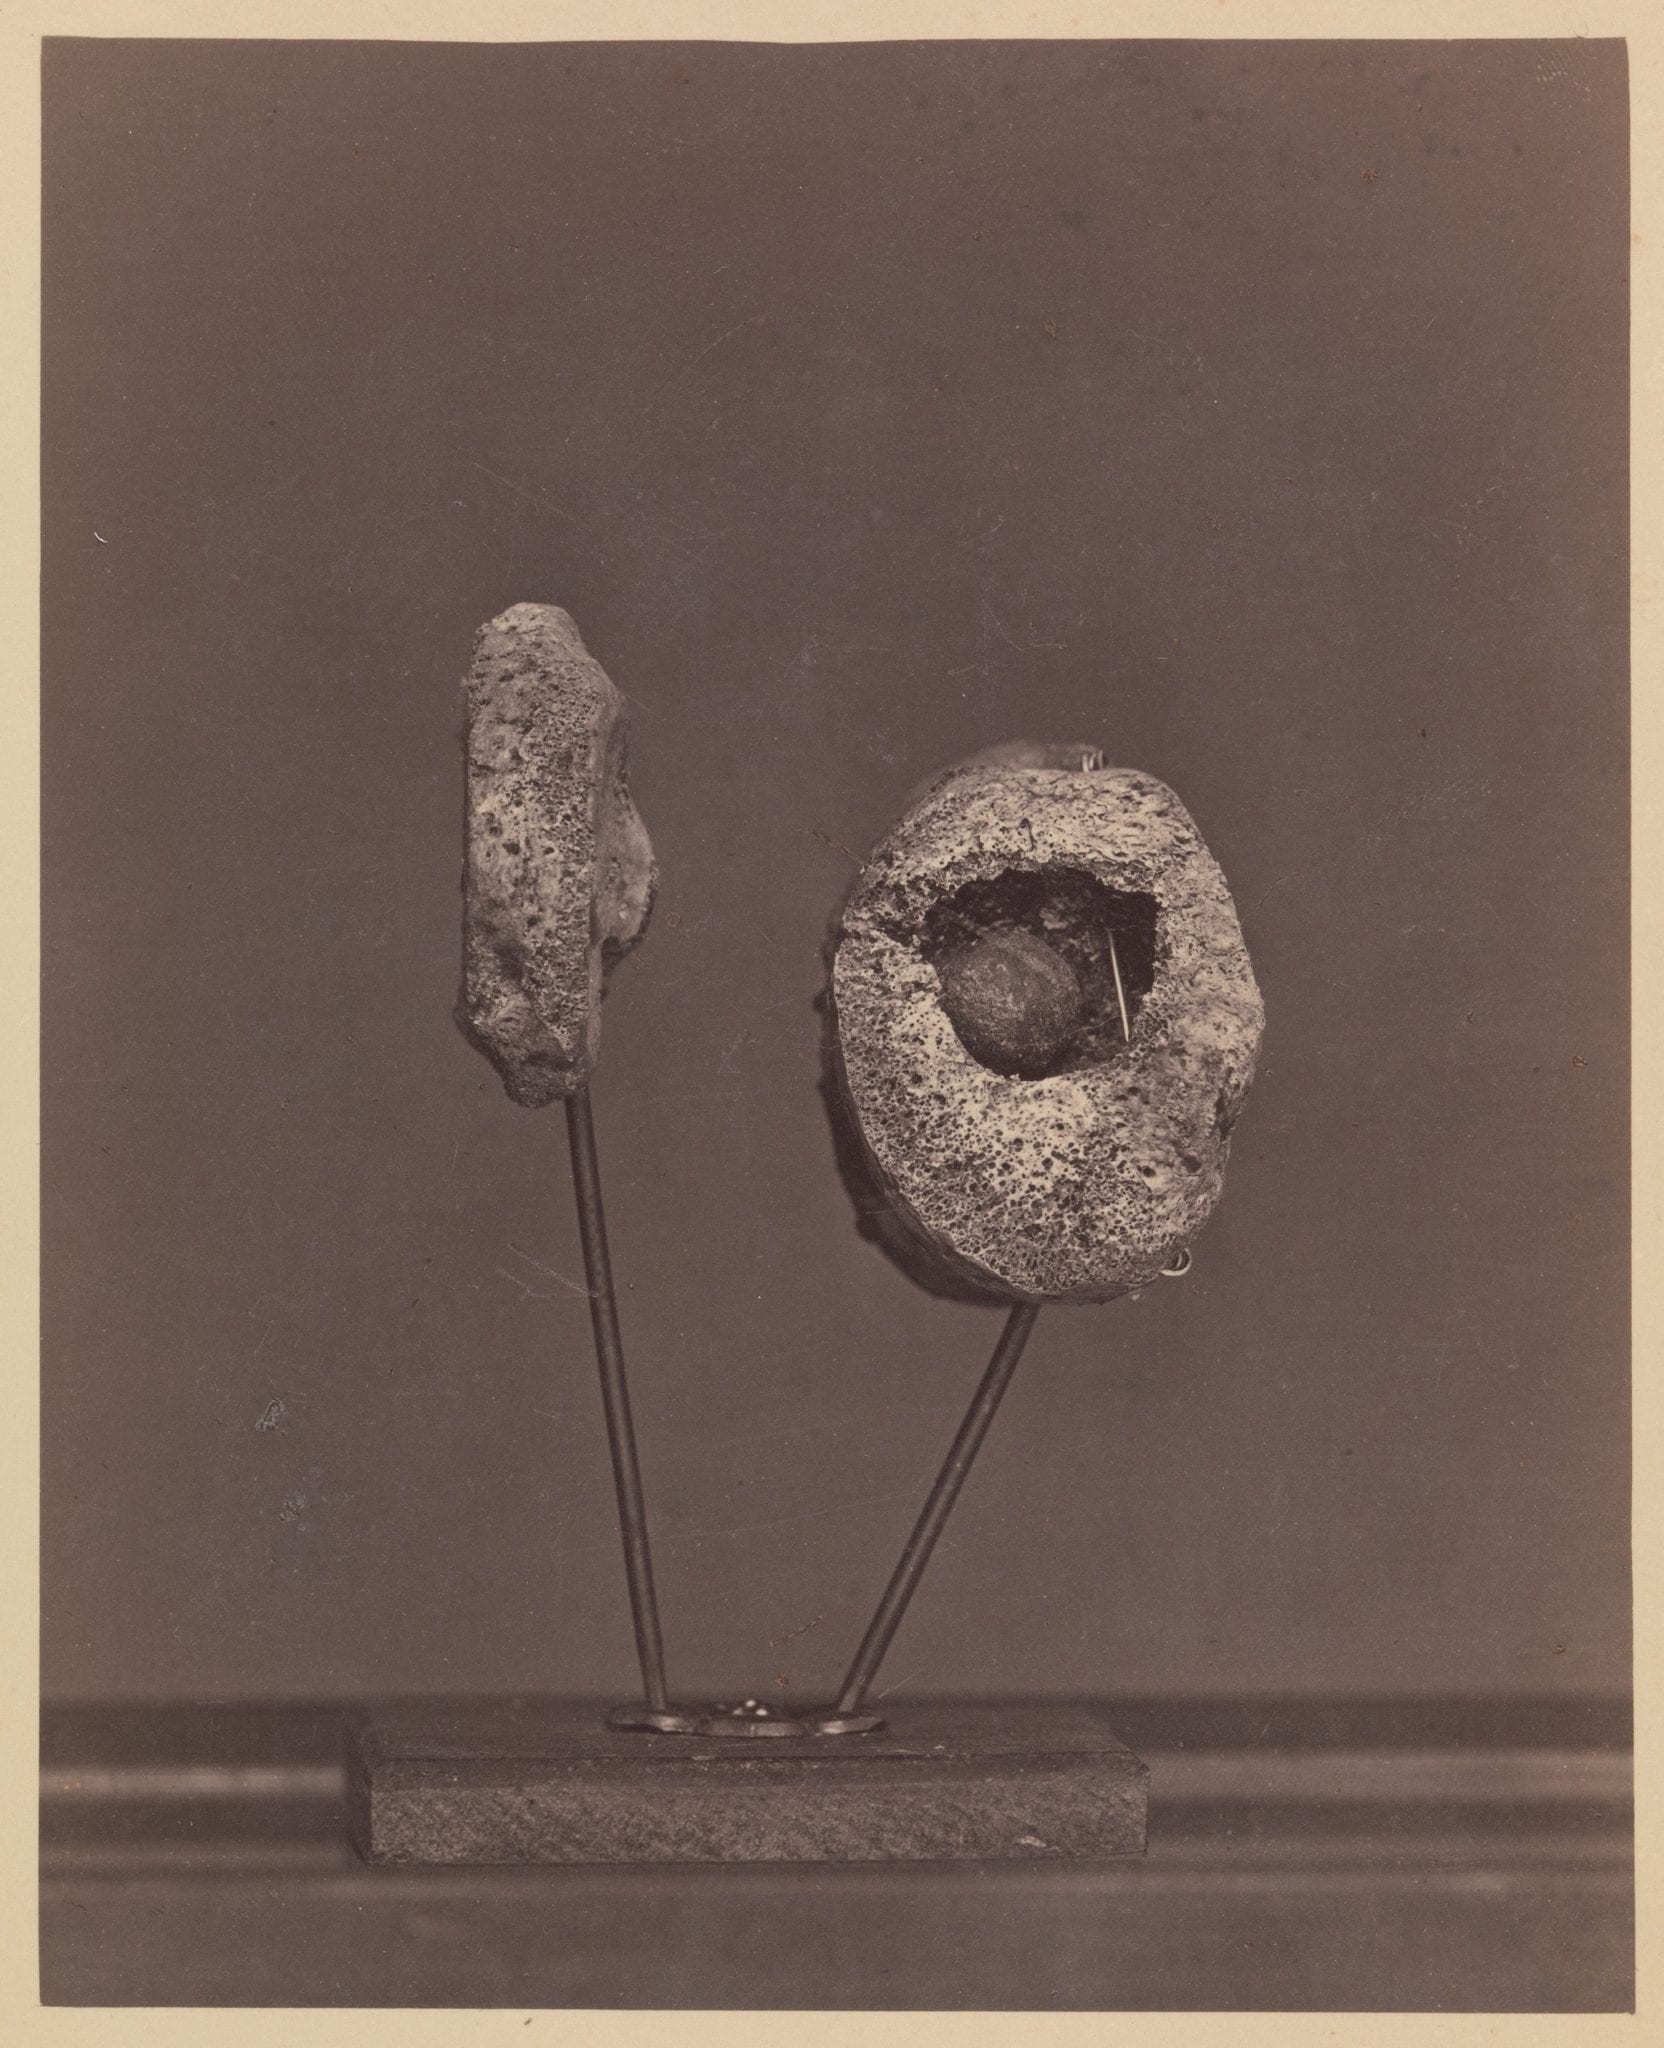 Photograph of knee joint with musket ball inside.